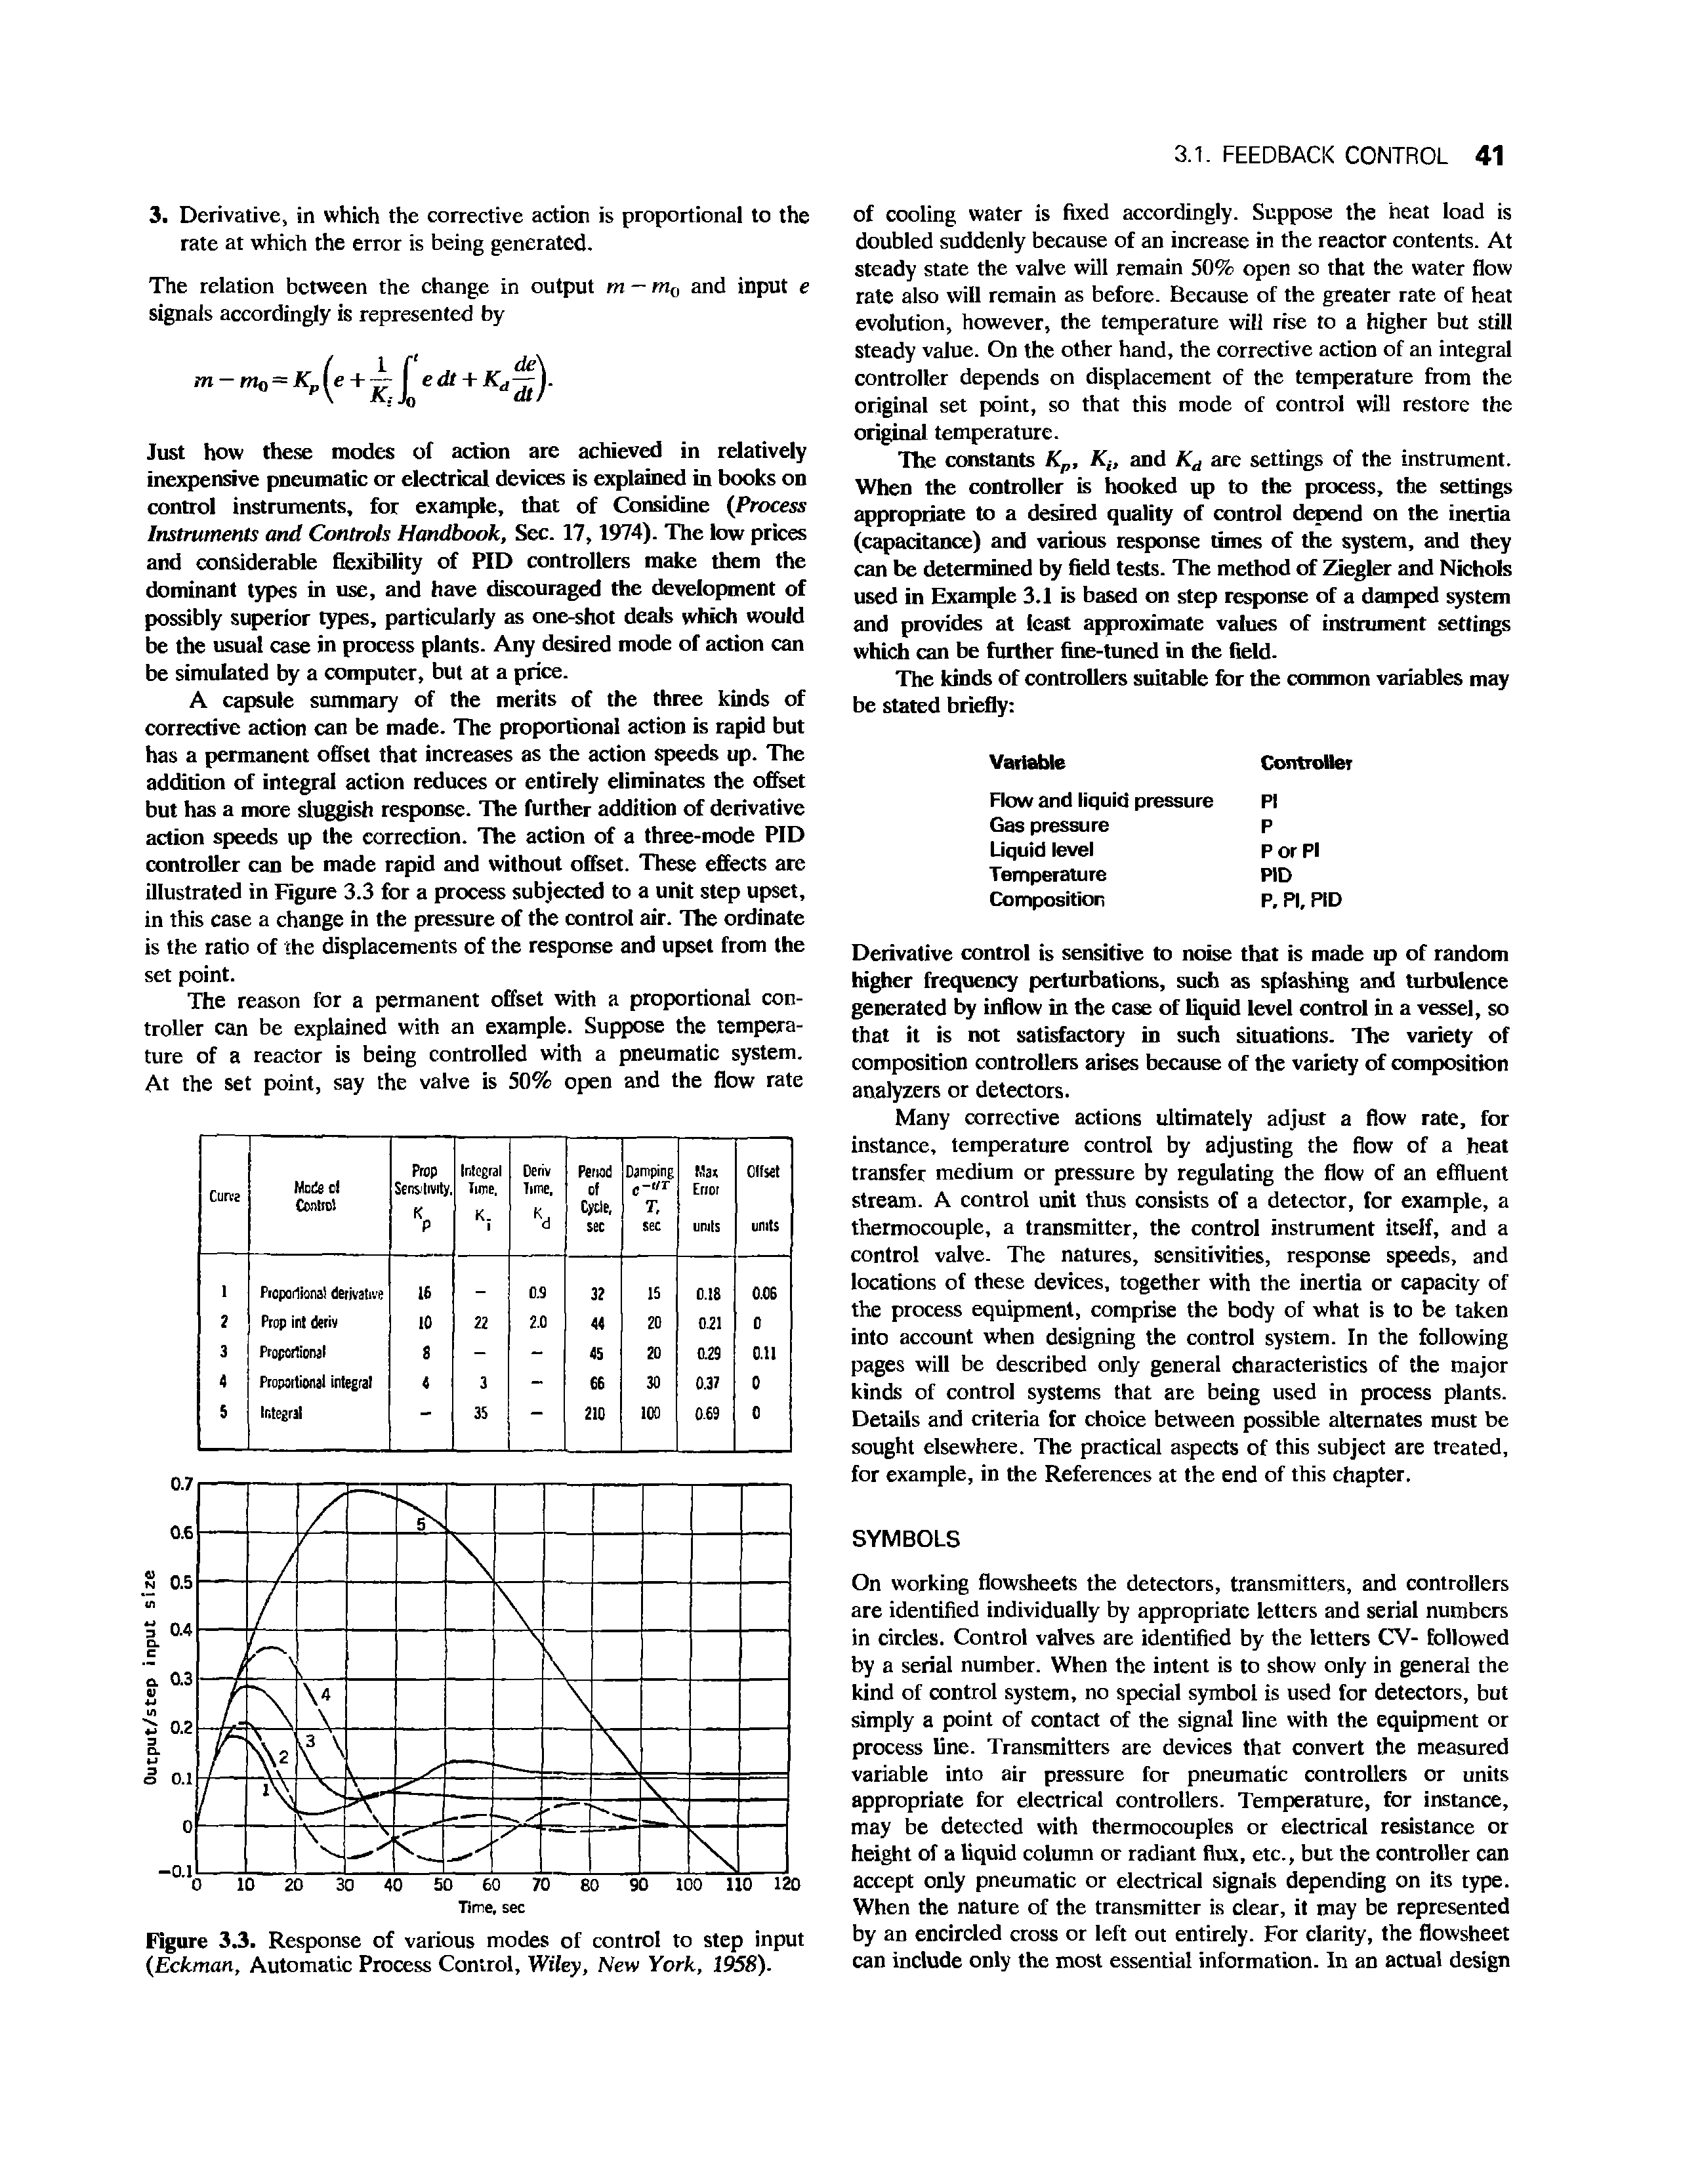 Figure 3.3. Response of various modes of control to step input (Eckman, Automatic Process Control, Wiley, New York, 1958).